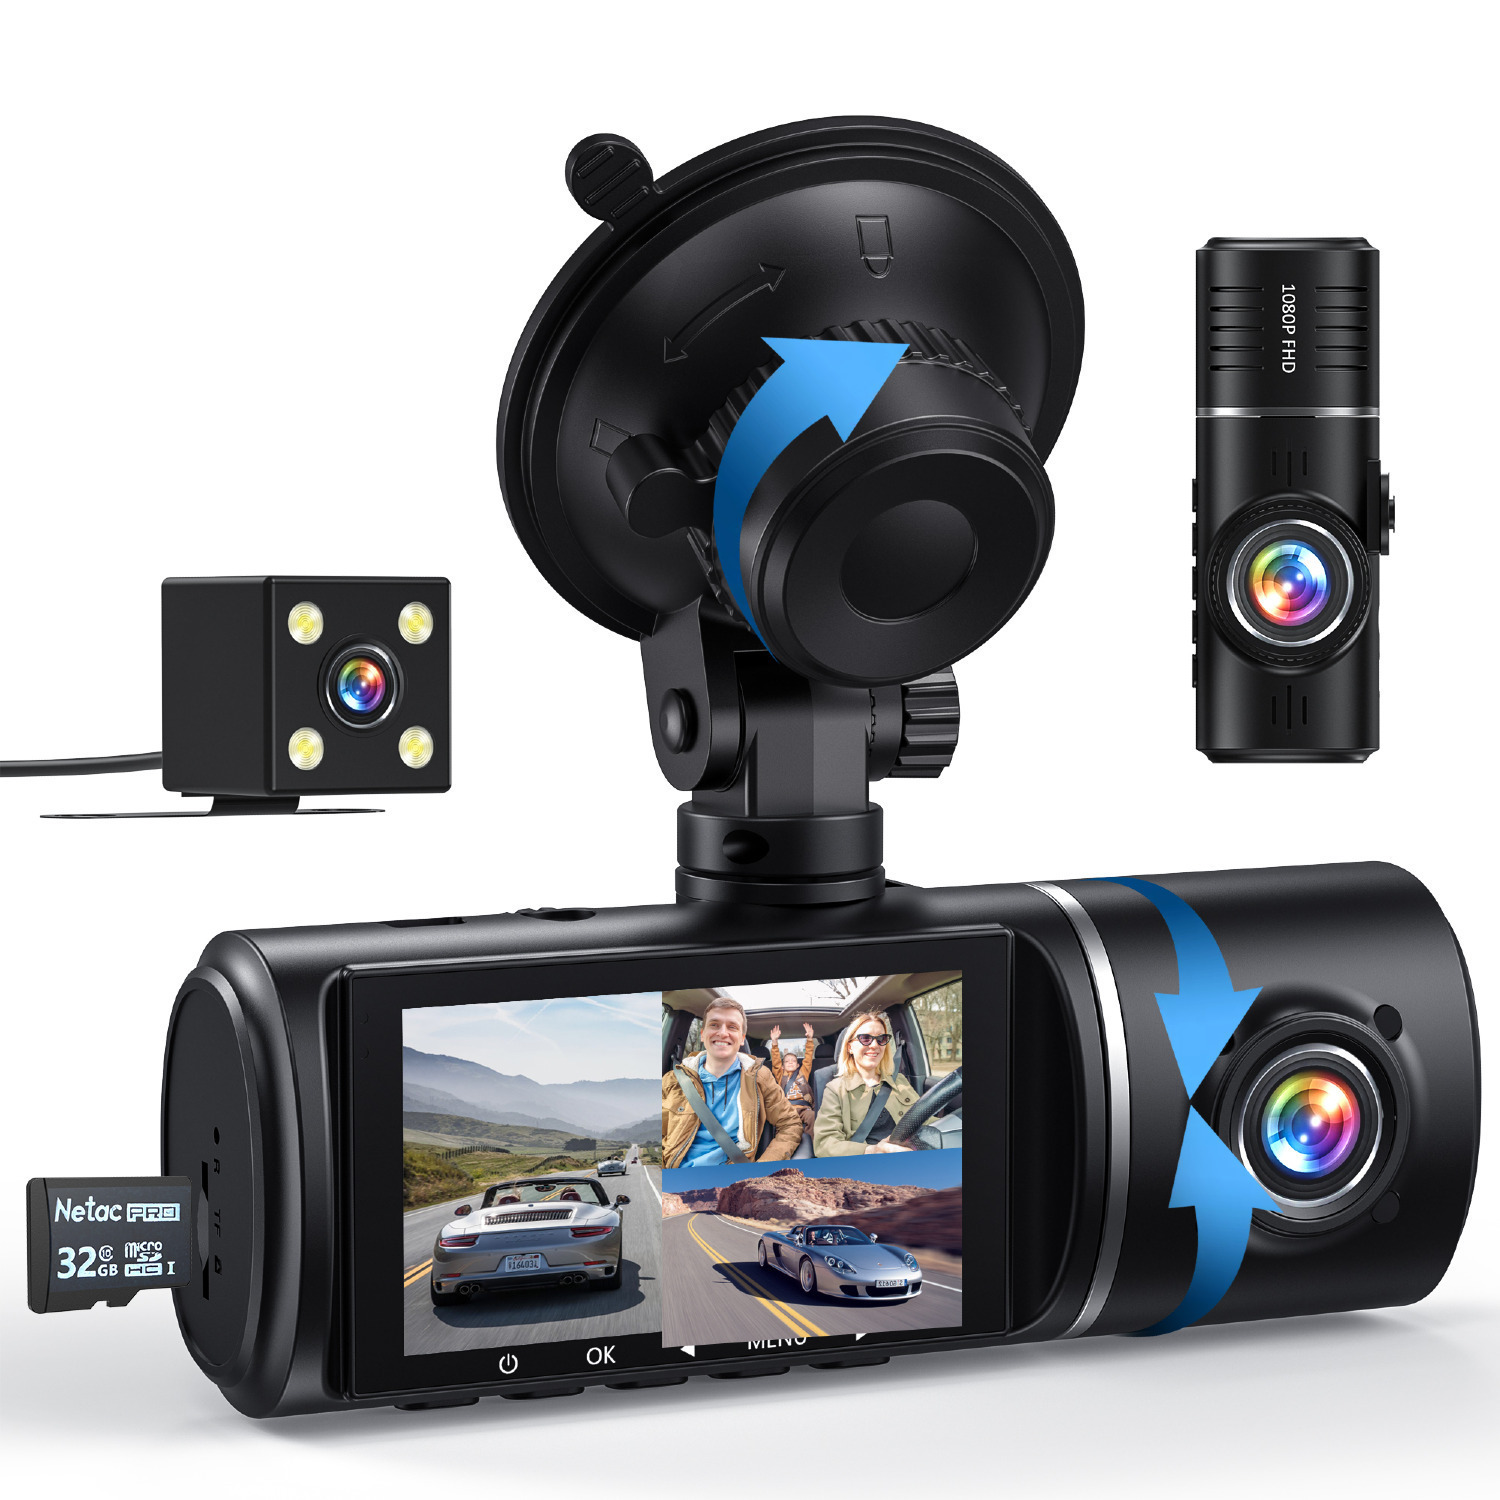 JQVV 3 Channel Dash Cam (1080p Front/480p Rear/720p Inside) w/ 32GB Memory Card $20 + Free Shipping